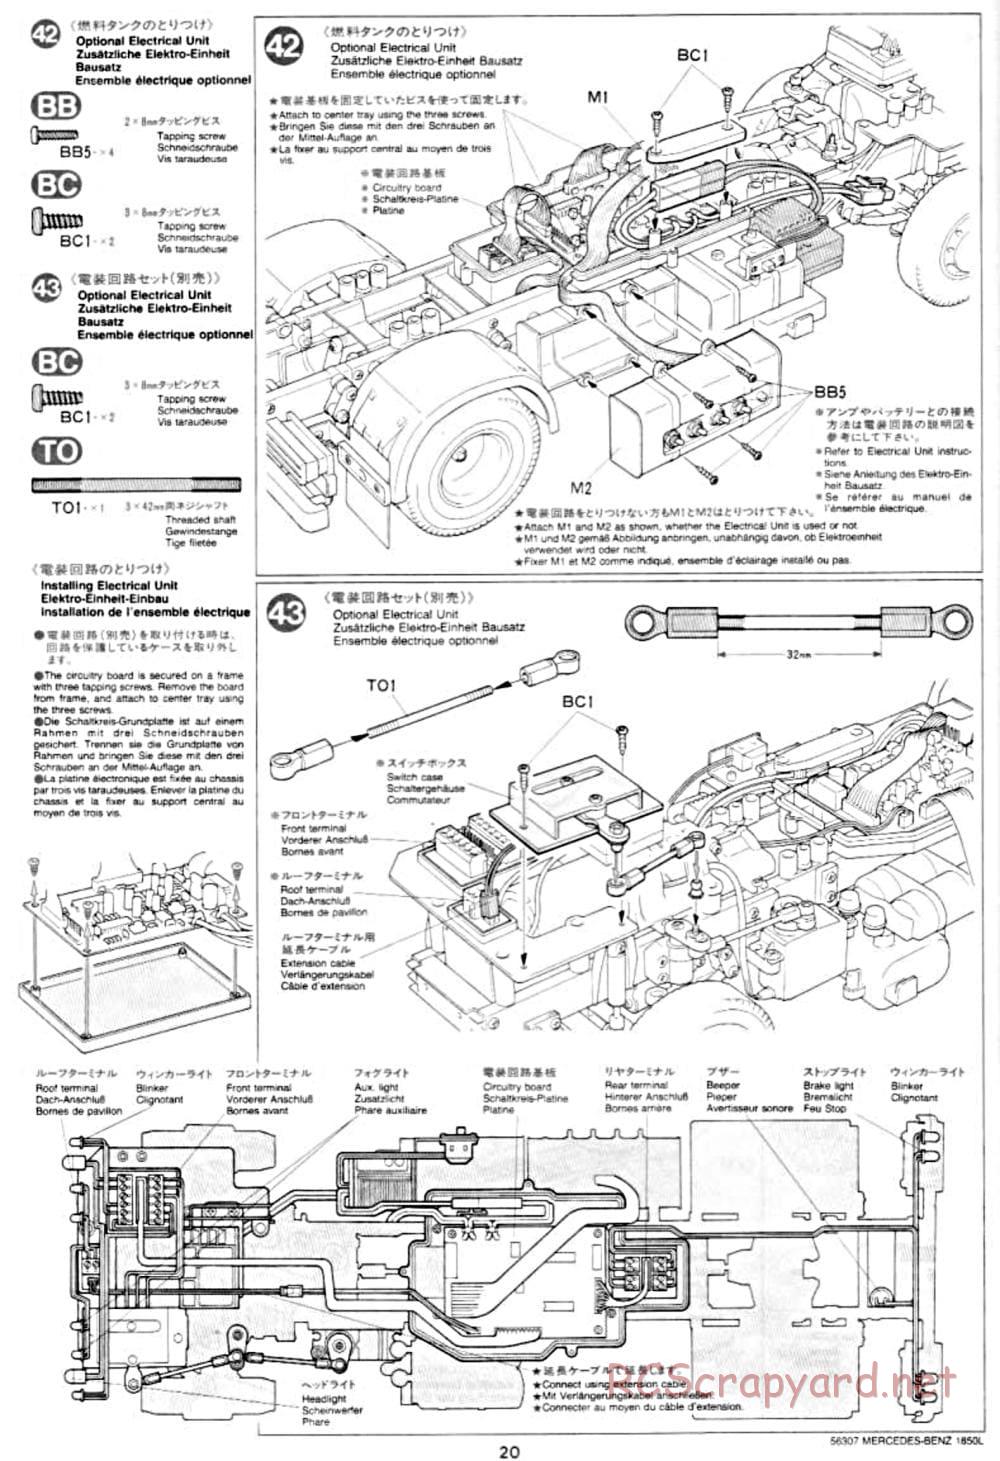 Tamiya - Mercedes-Benz 1850L Delivery Truck - Manual - Page 20